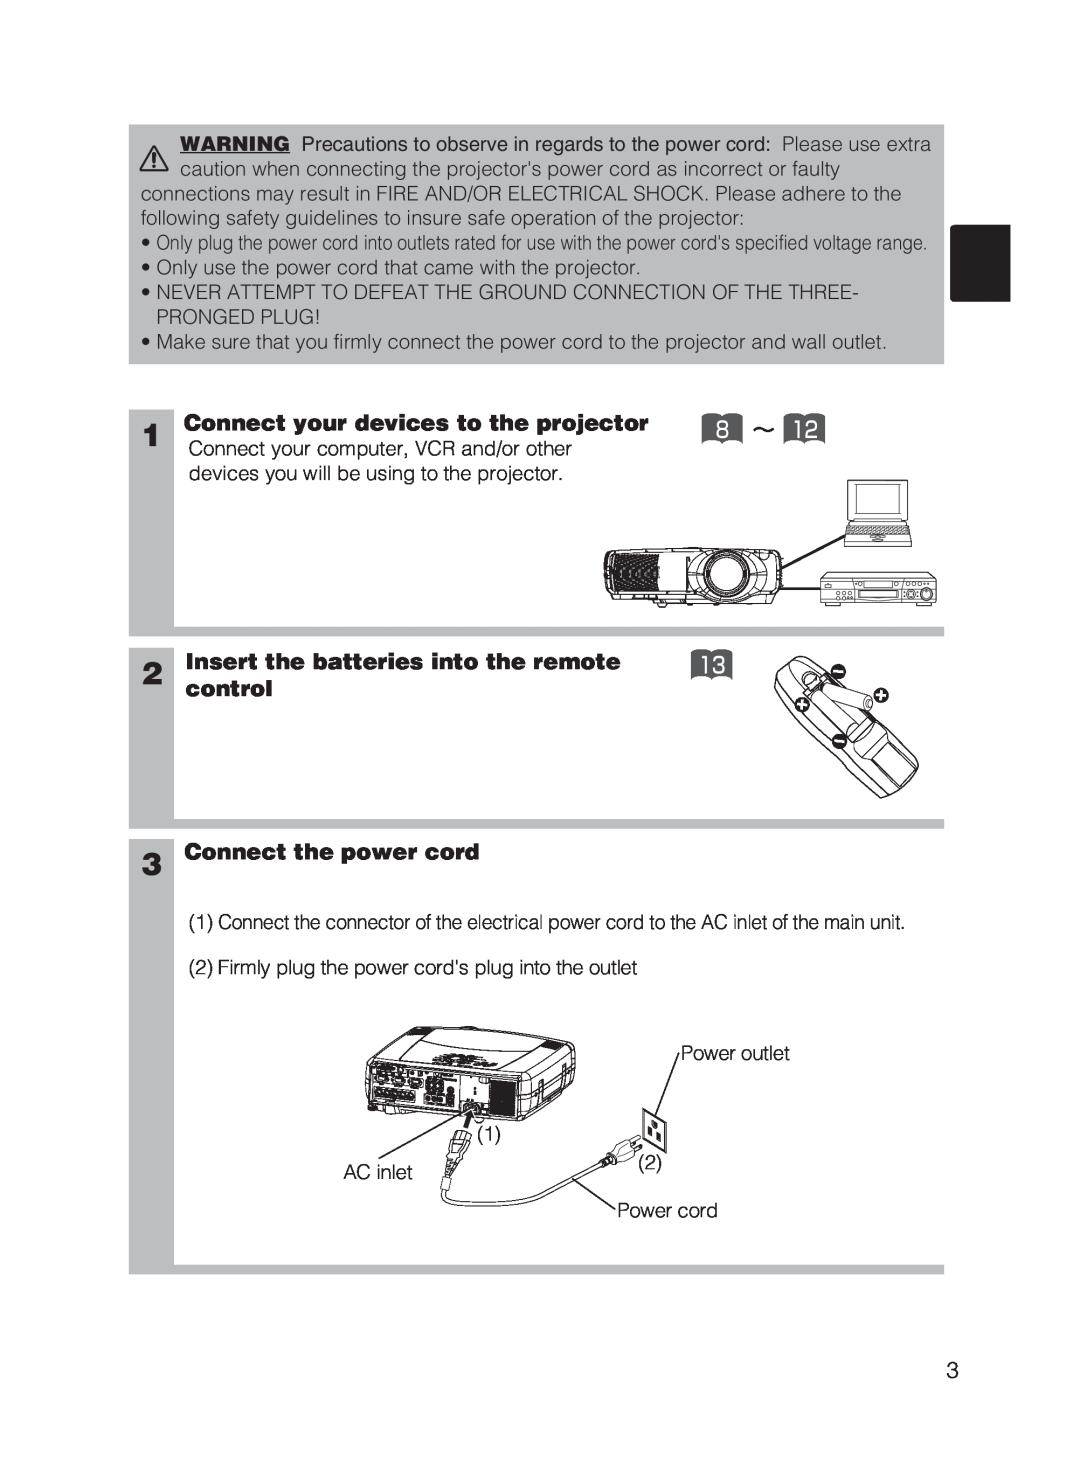 Hitachi CP-X870 user manual Connect your devices to the projector, Insert the batteries into the remote, control 